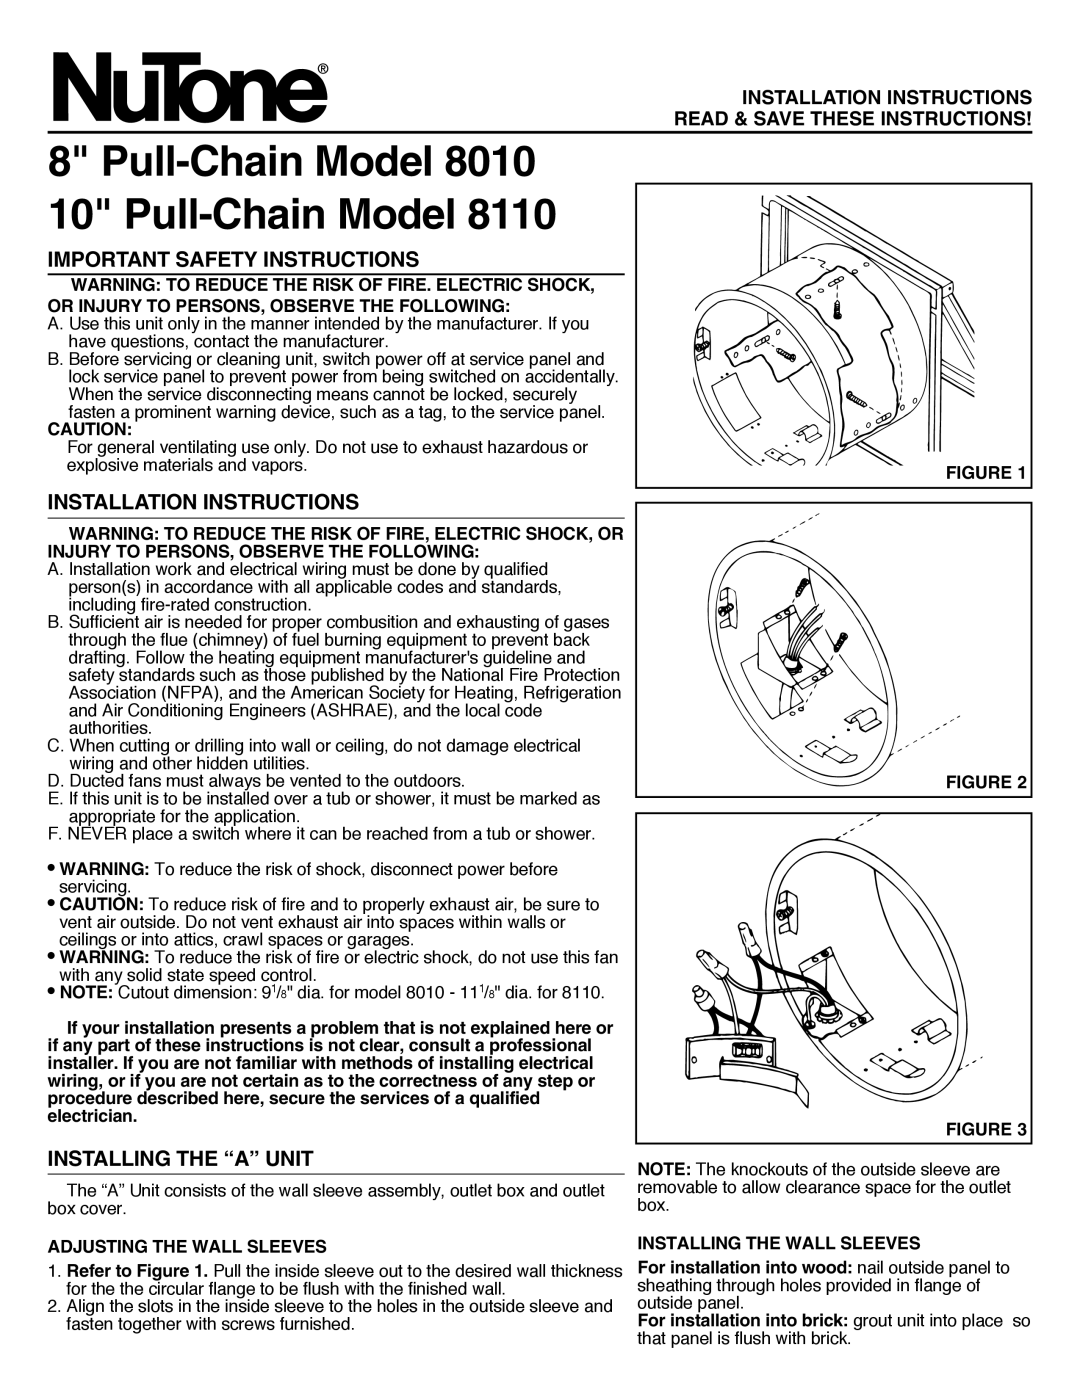 NuTone 8010, 8110 important safety instructions Important Safety Instructions, Installation Instructions 